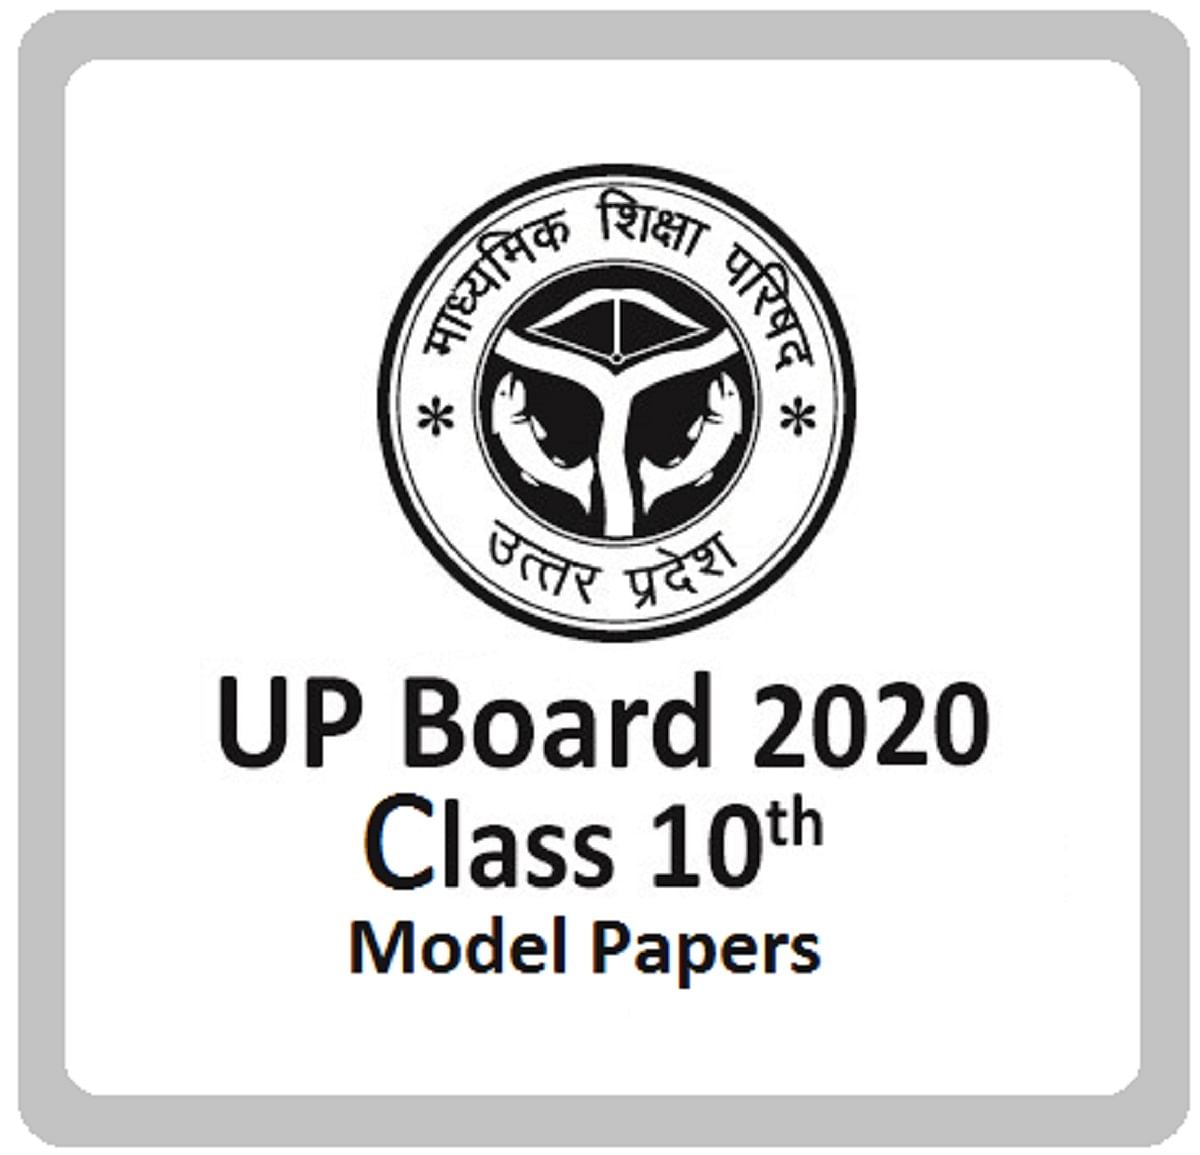 UP Board 2020: Question Bank for Class 10th Computer Exam